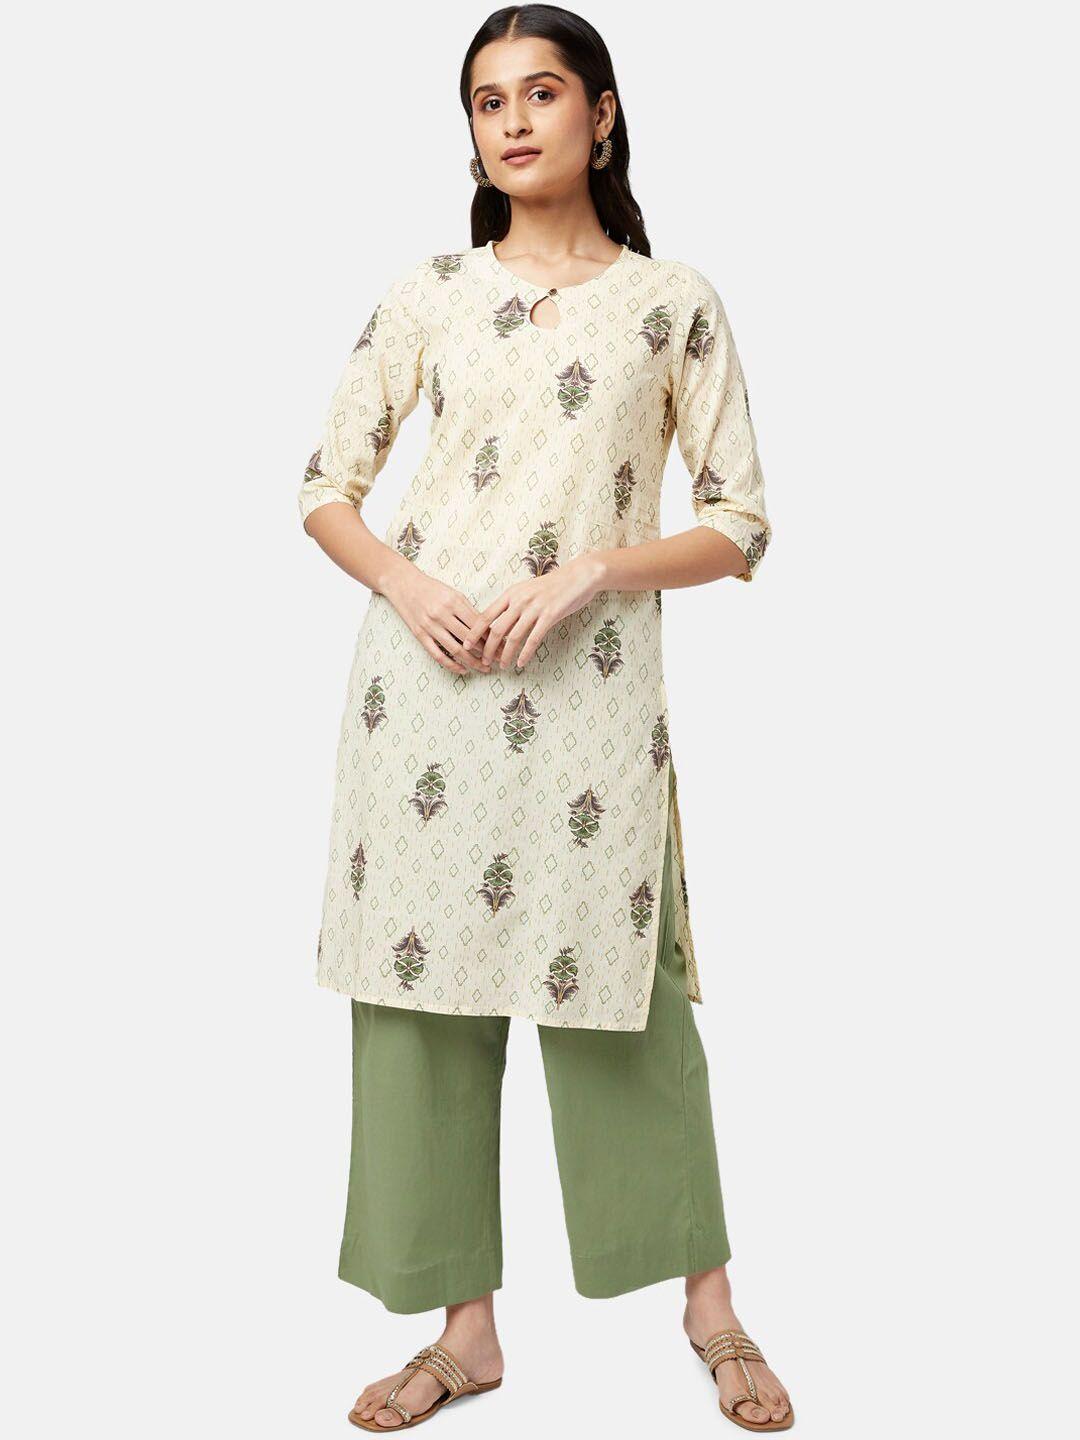 rangmanch by pantaloons women off white floral printed pure cotton kurta with trousers